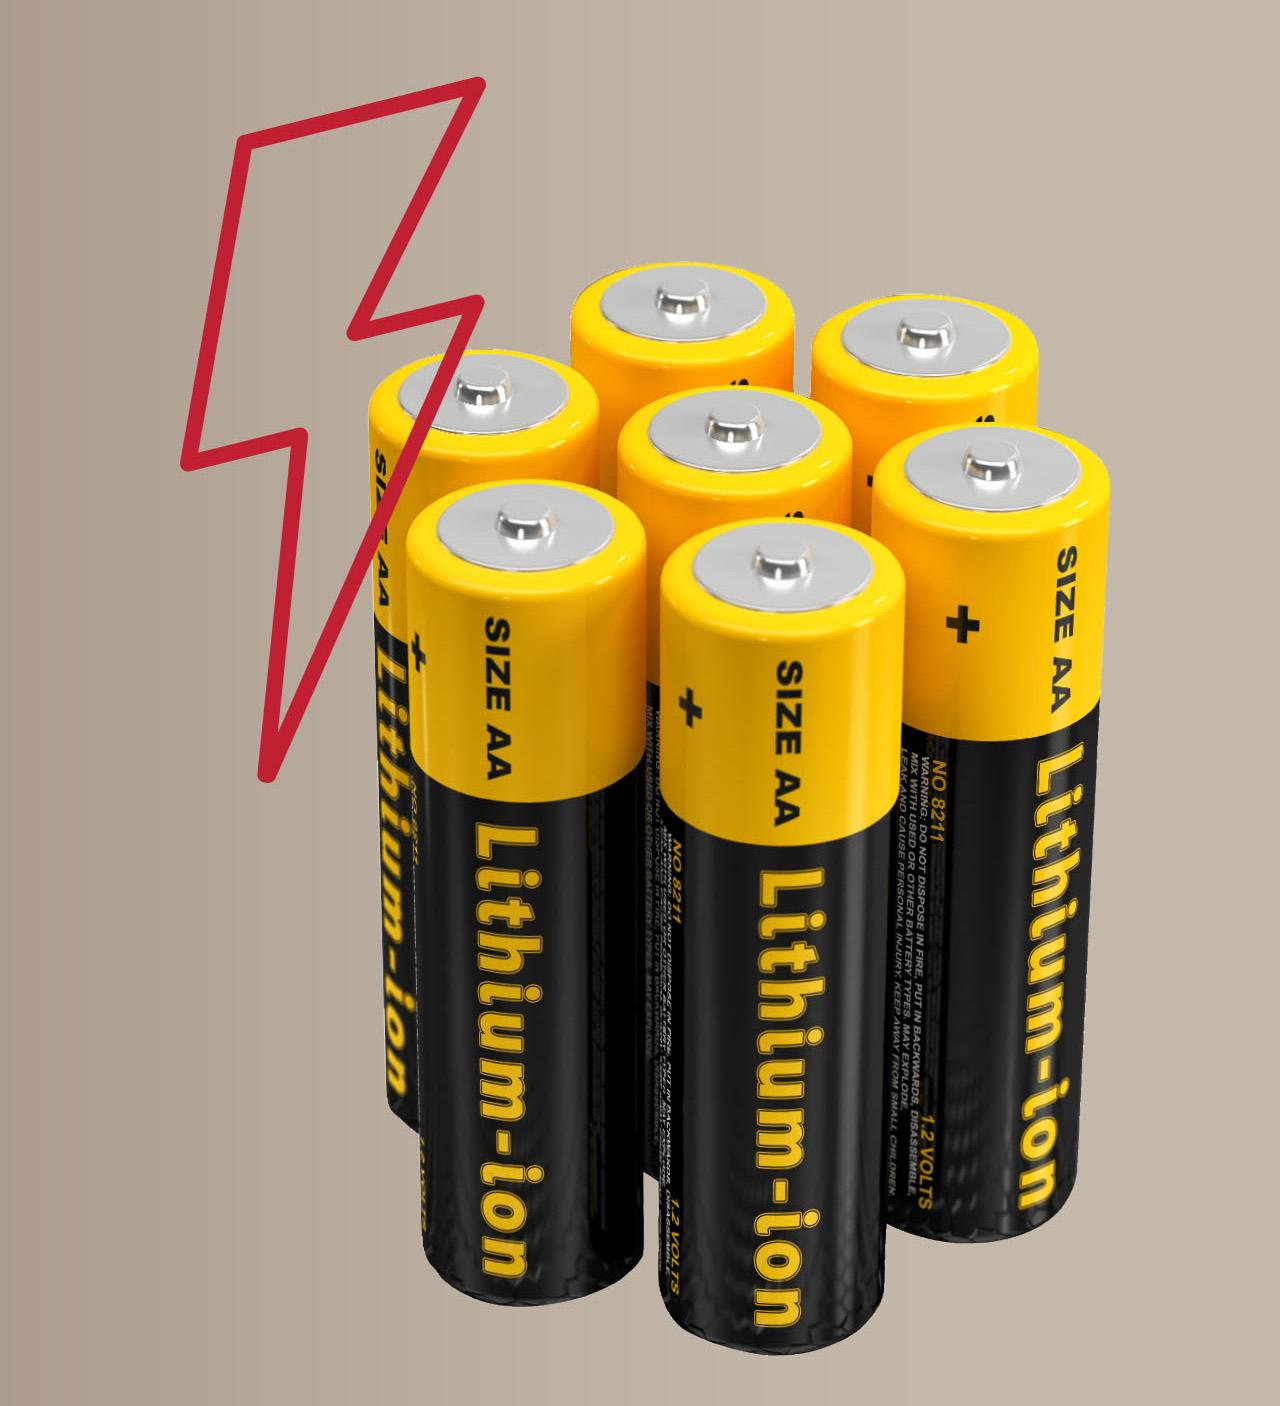 AA Li-ion batteries with a lightning bolt icon